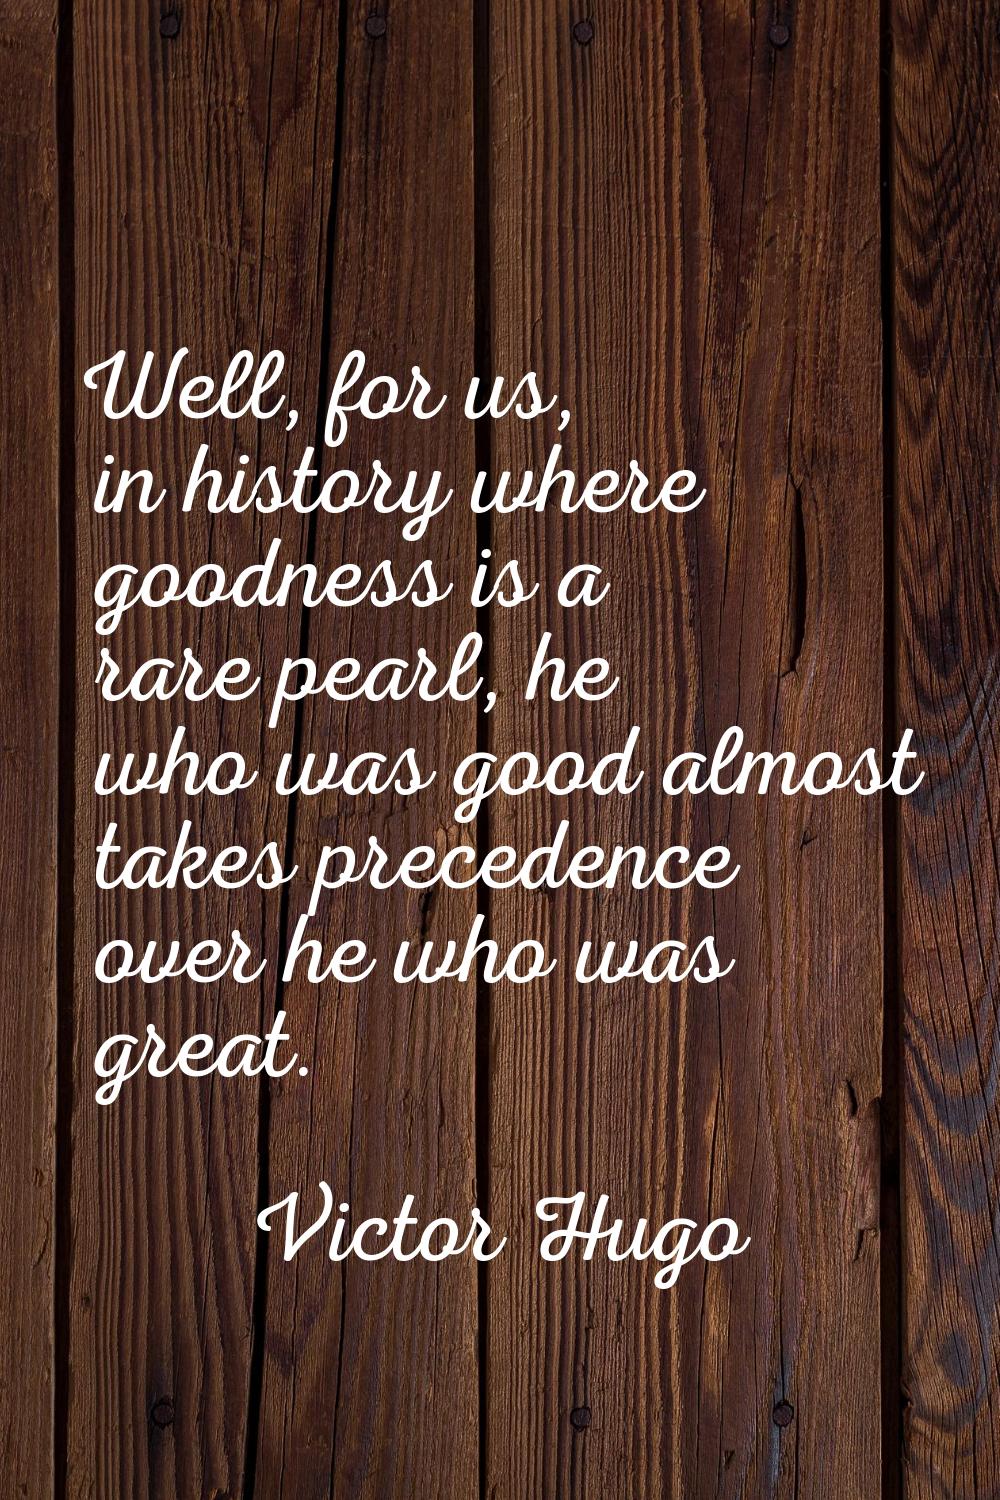 Well, for us, in history where goodness is a rare pearl, he who was good almost takes precedence ov